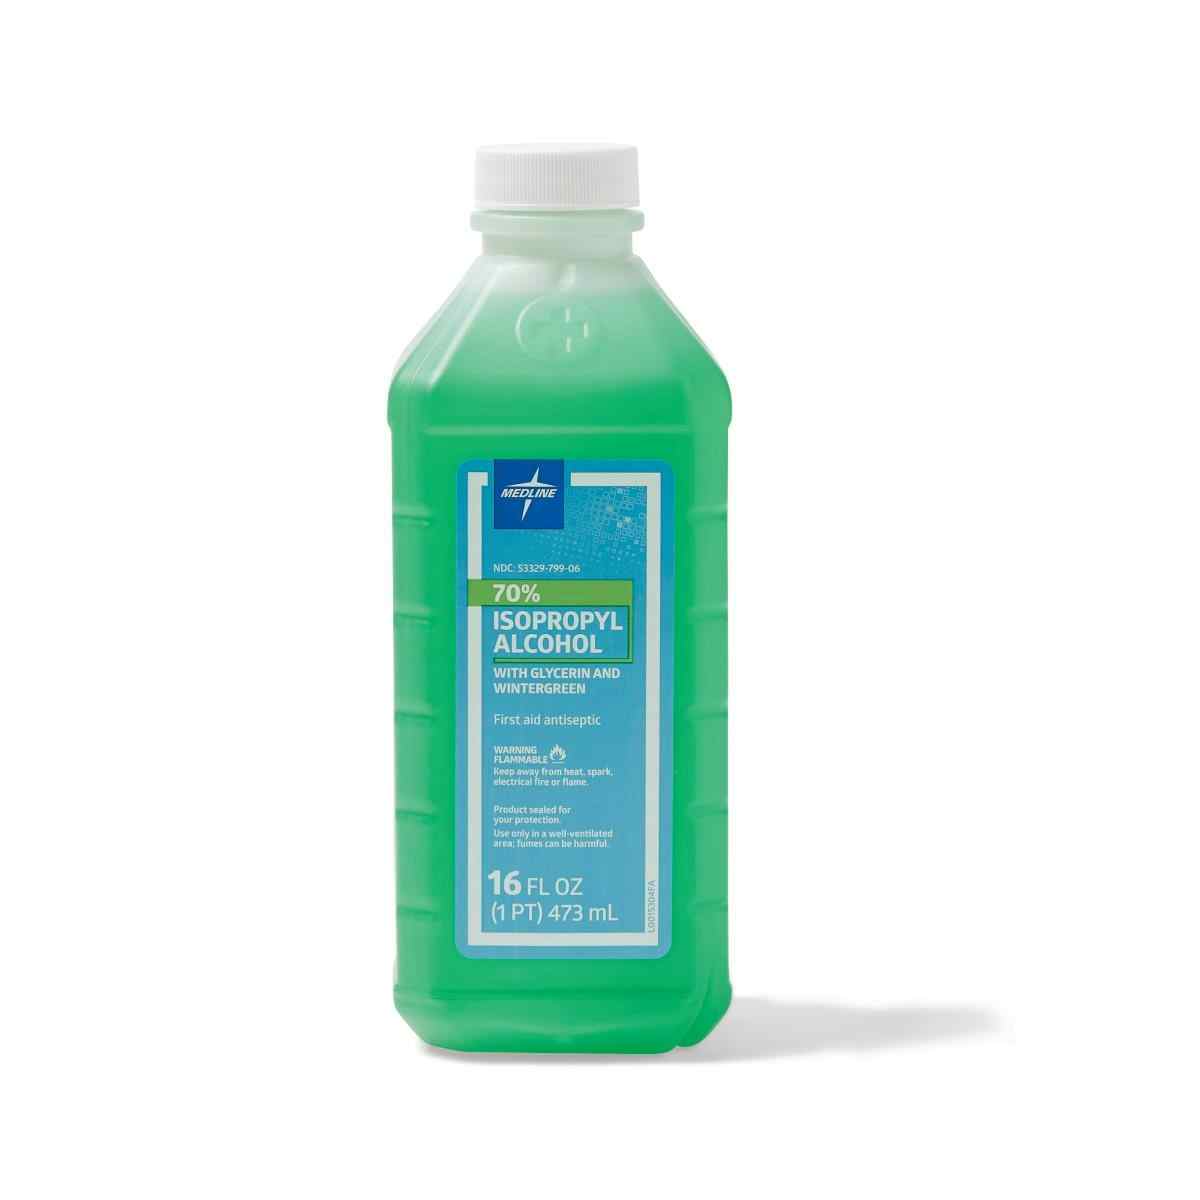 Medline 70% Isopropyl Alcohol with Glycerin and Wintergreen, MDS098003WH, 16 oz. - 1 Each